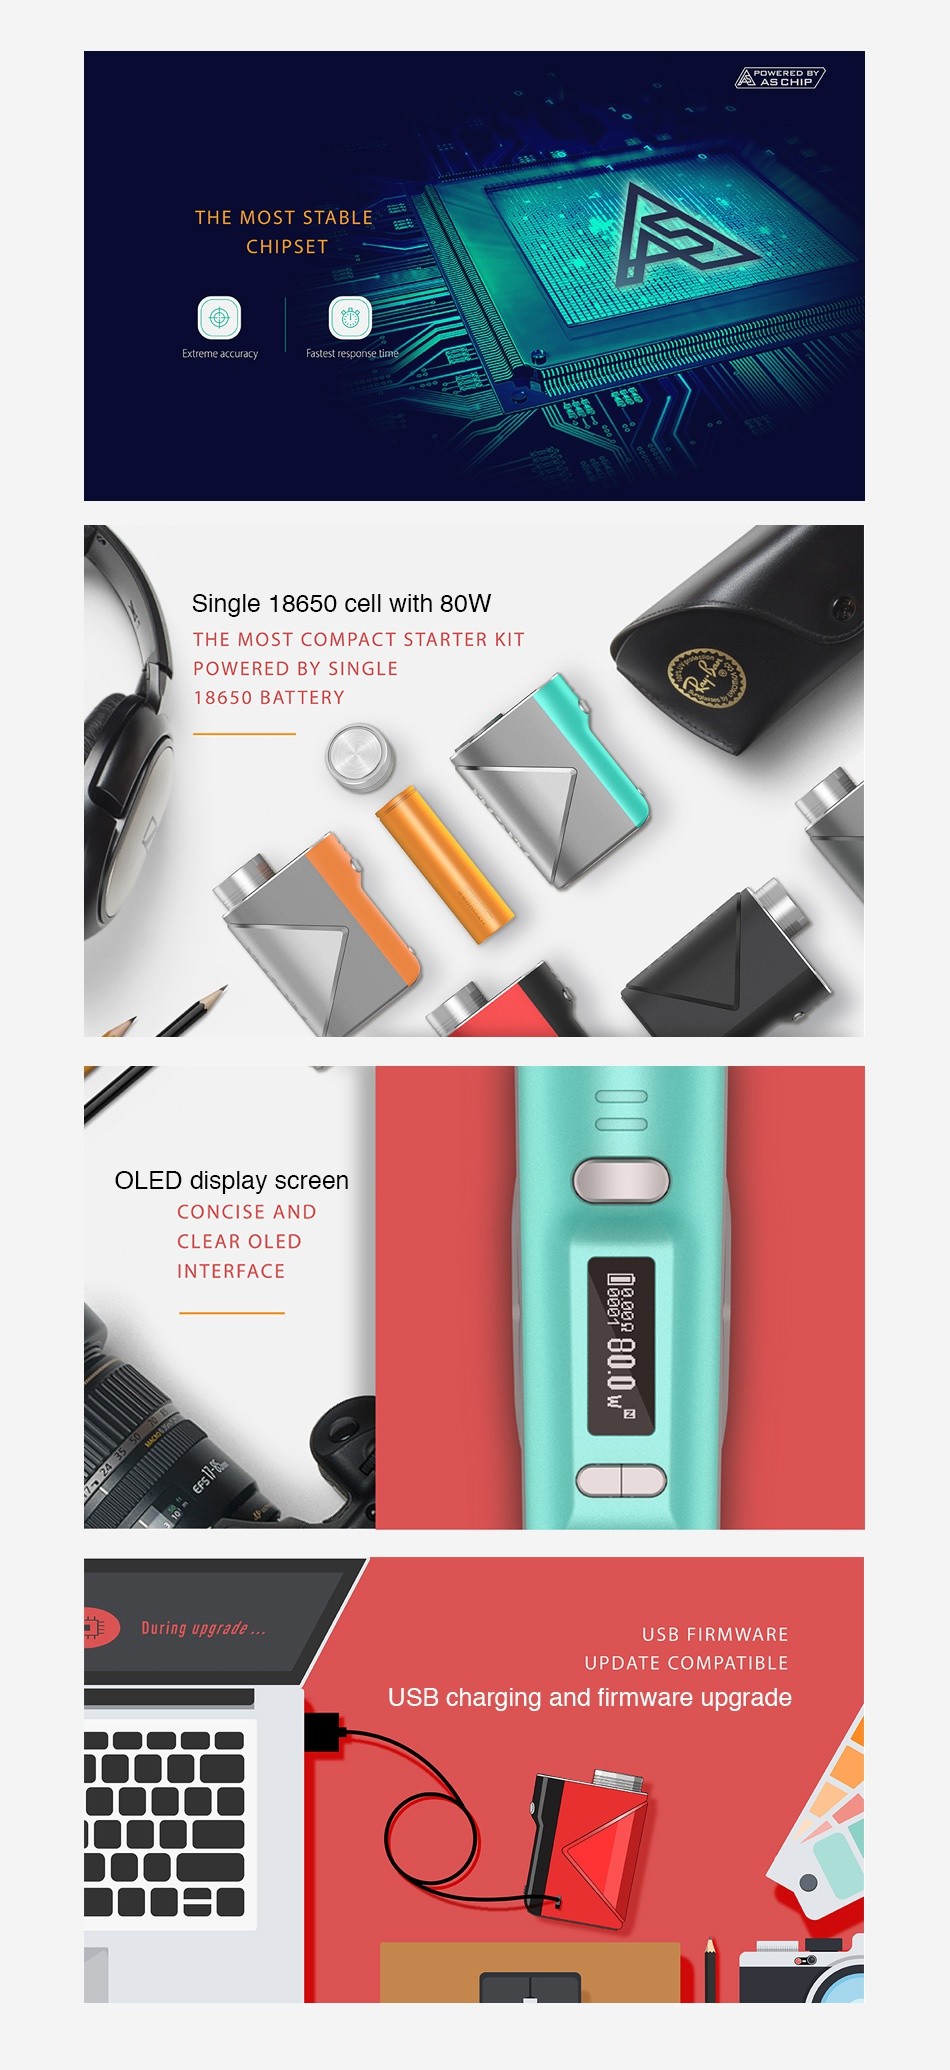 Geekvape Lucid 80W TC Box MOD A E  THE MOST STABLE CHIPSET Extreme accuracy Fastest resoonse ti Single 18650 cell with 80W THE MOST COMPACT STARTER KIT POWERED BY SINGLE 18650 BATTERY olEd display screen CONCISE AND CLEAR OLED INTERFACE uring upgrade USB FIRMWARE UPDATE COMPATIBLE USB charging and firmware upgrade